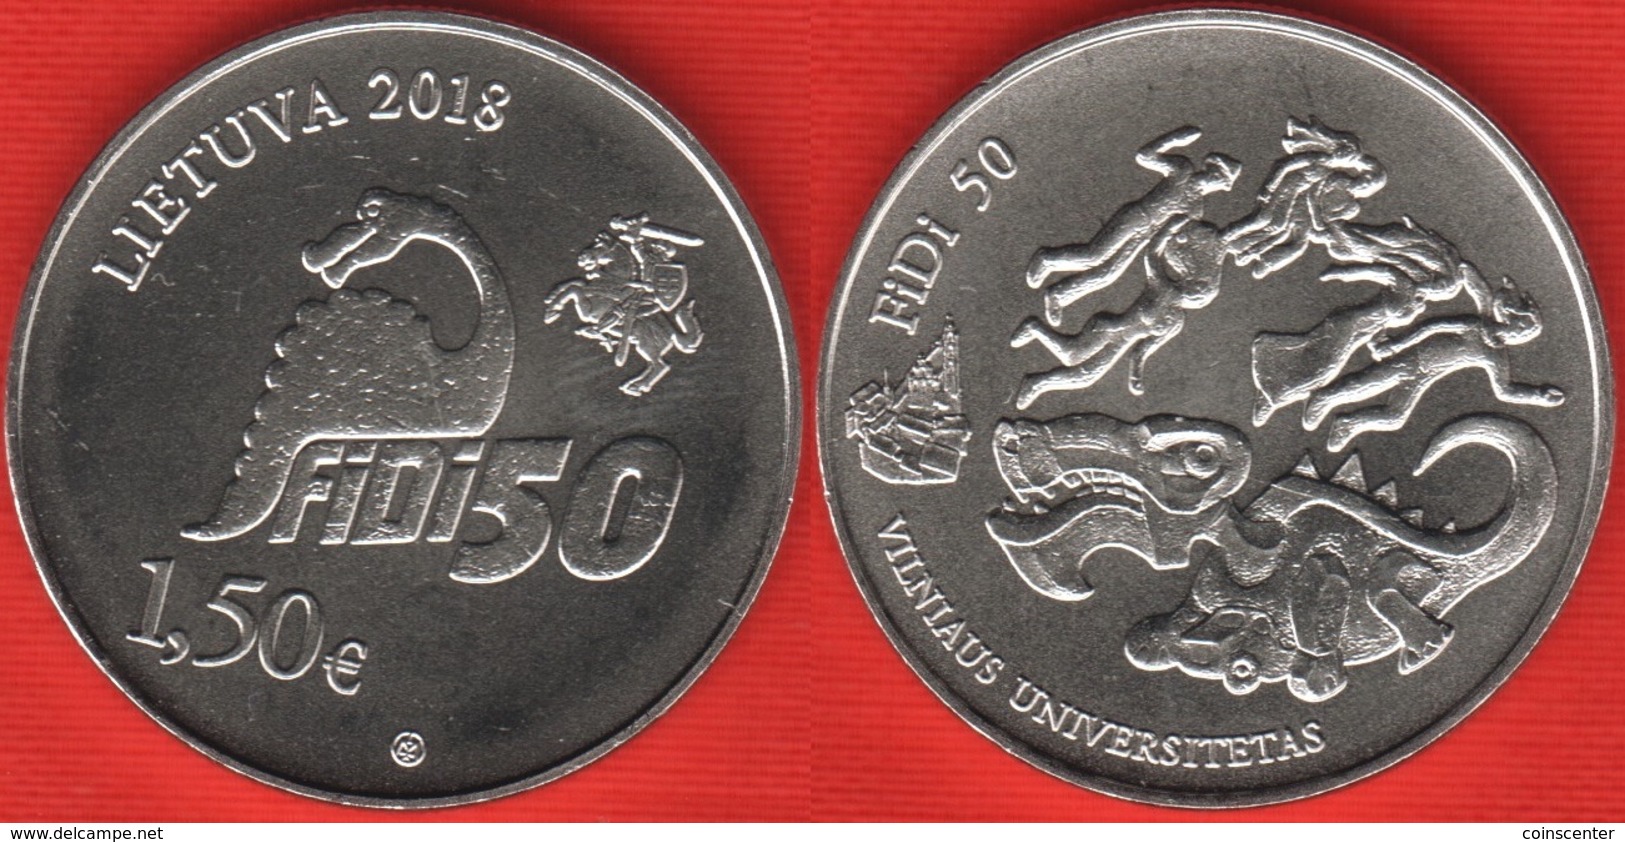 Lithuania 1.5 Euro 2018 "Physicists Day Of Vilnius University, FiDi 50" UNC - Lithuania